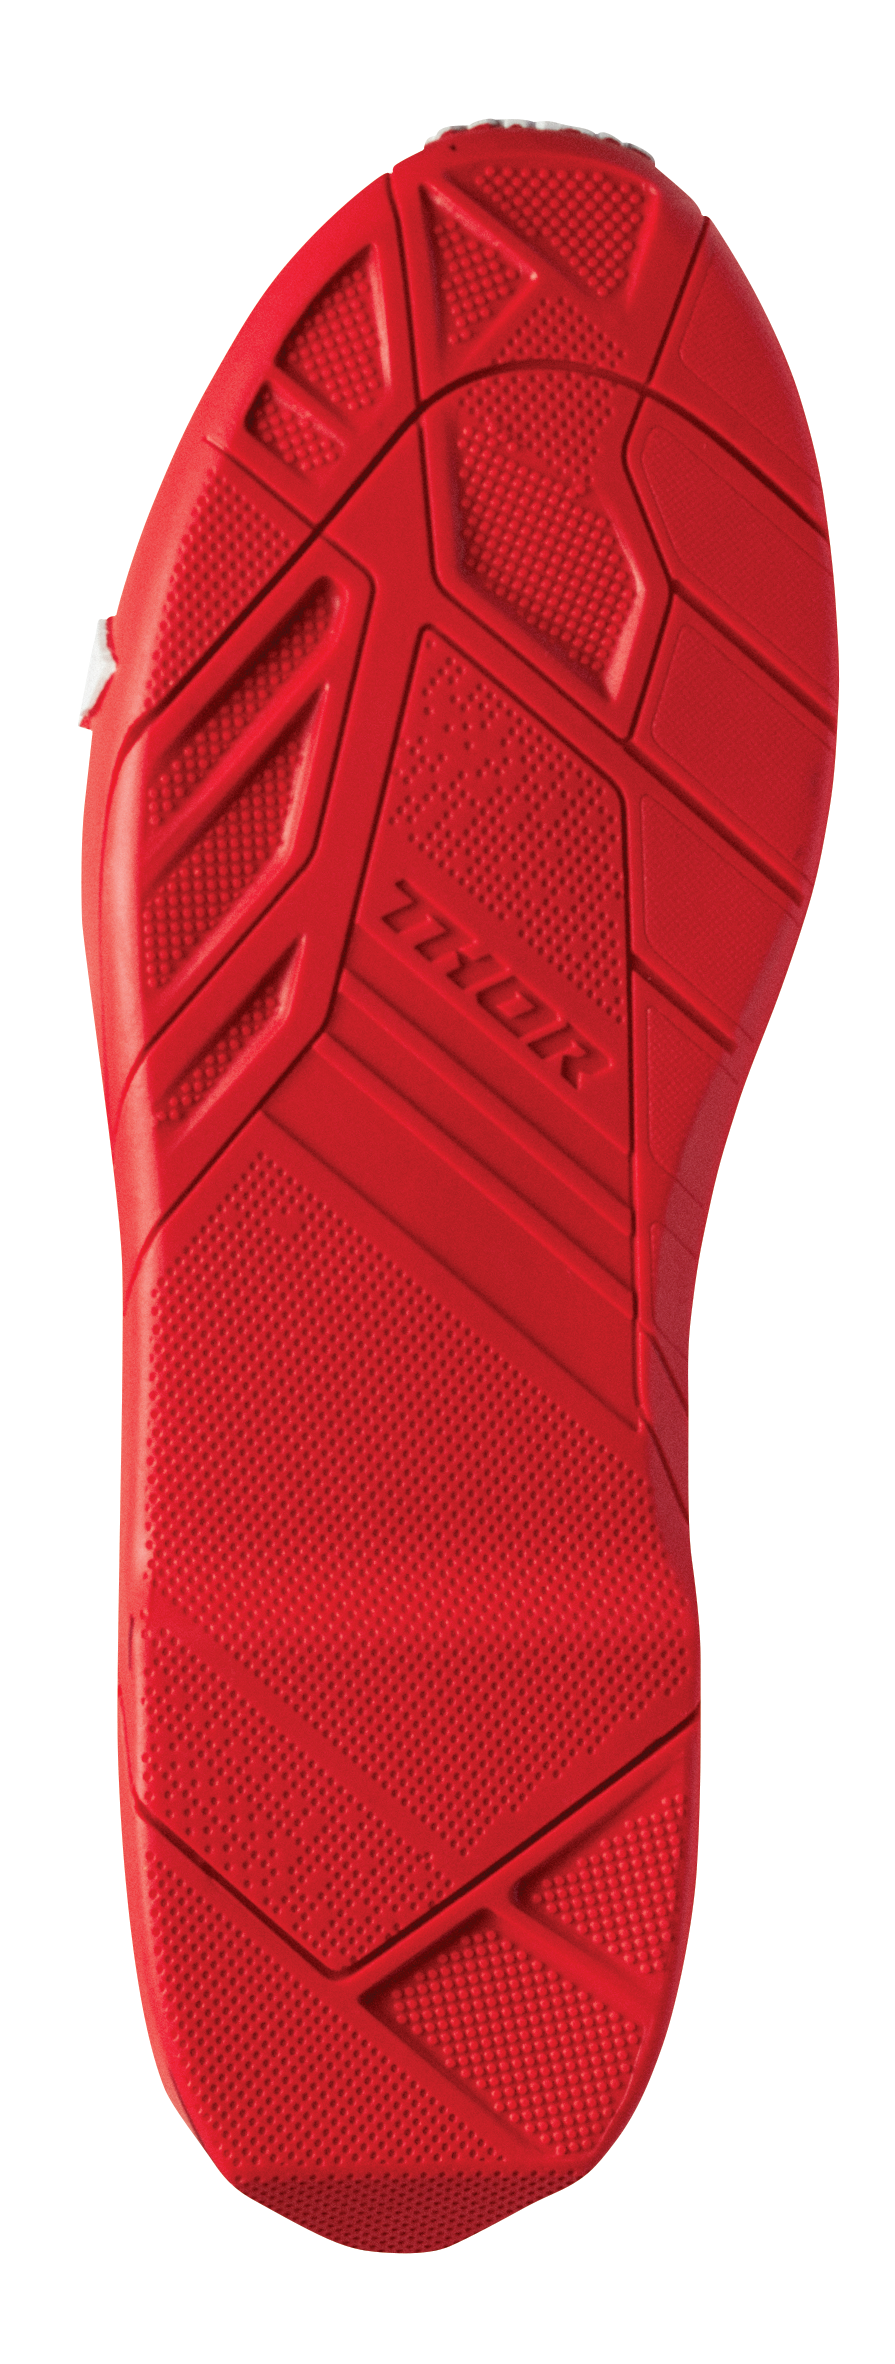 THOR Radial Boots Replacement Outsoles - Red - Size 11 3430-1000